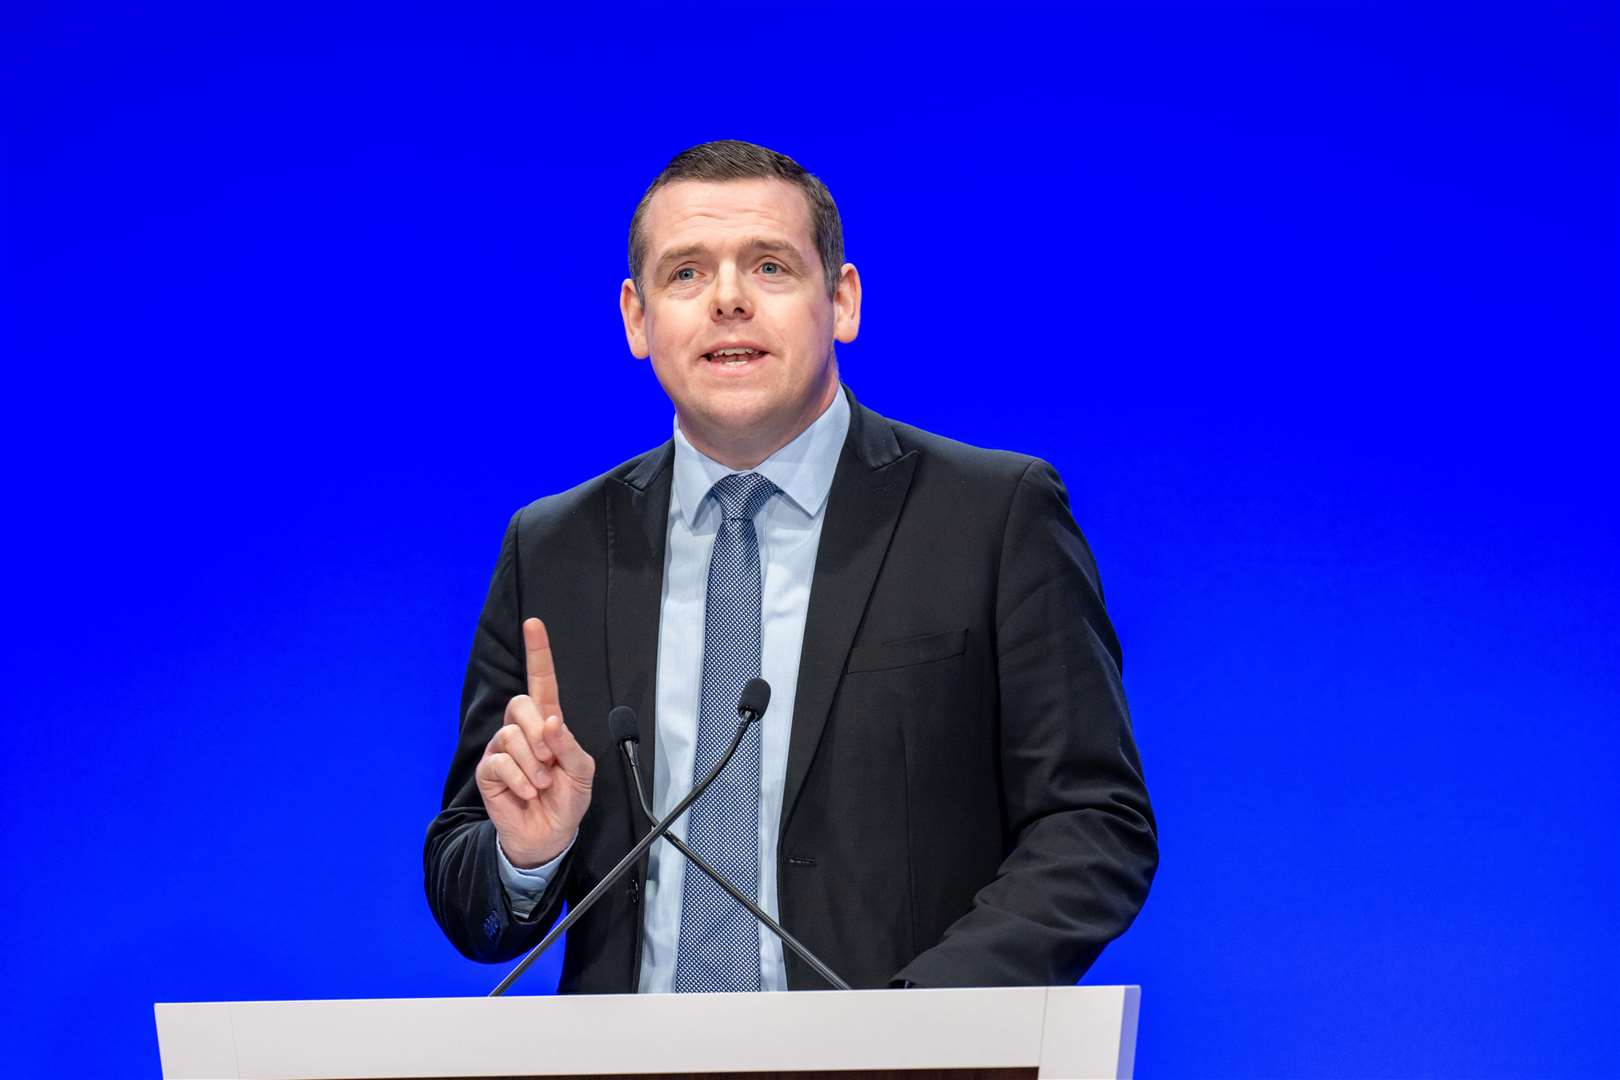 Scottish Conservative leader Douglas Ross has withdrawn the motion against Humza Yousaf’s leadership (Michal Wachucik/PA)